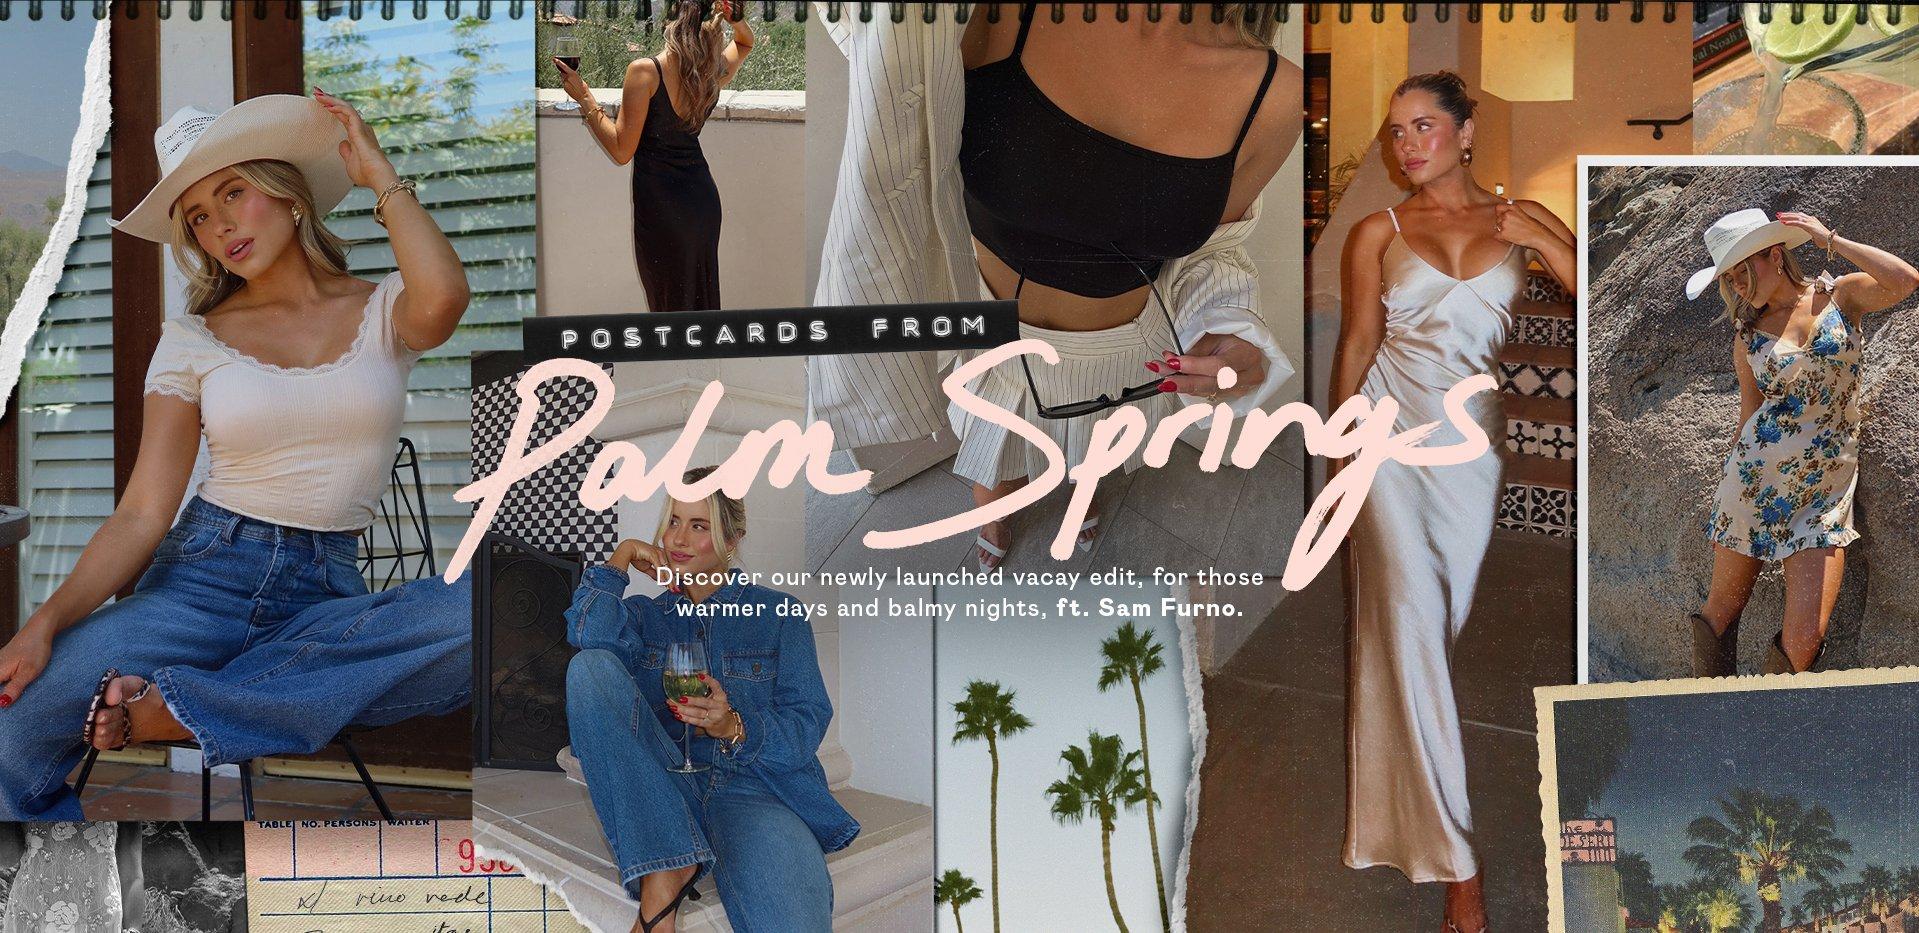 Postcards From Palm Springs